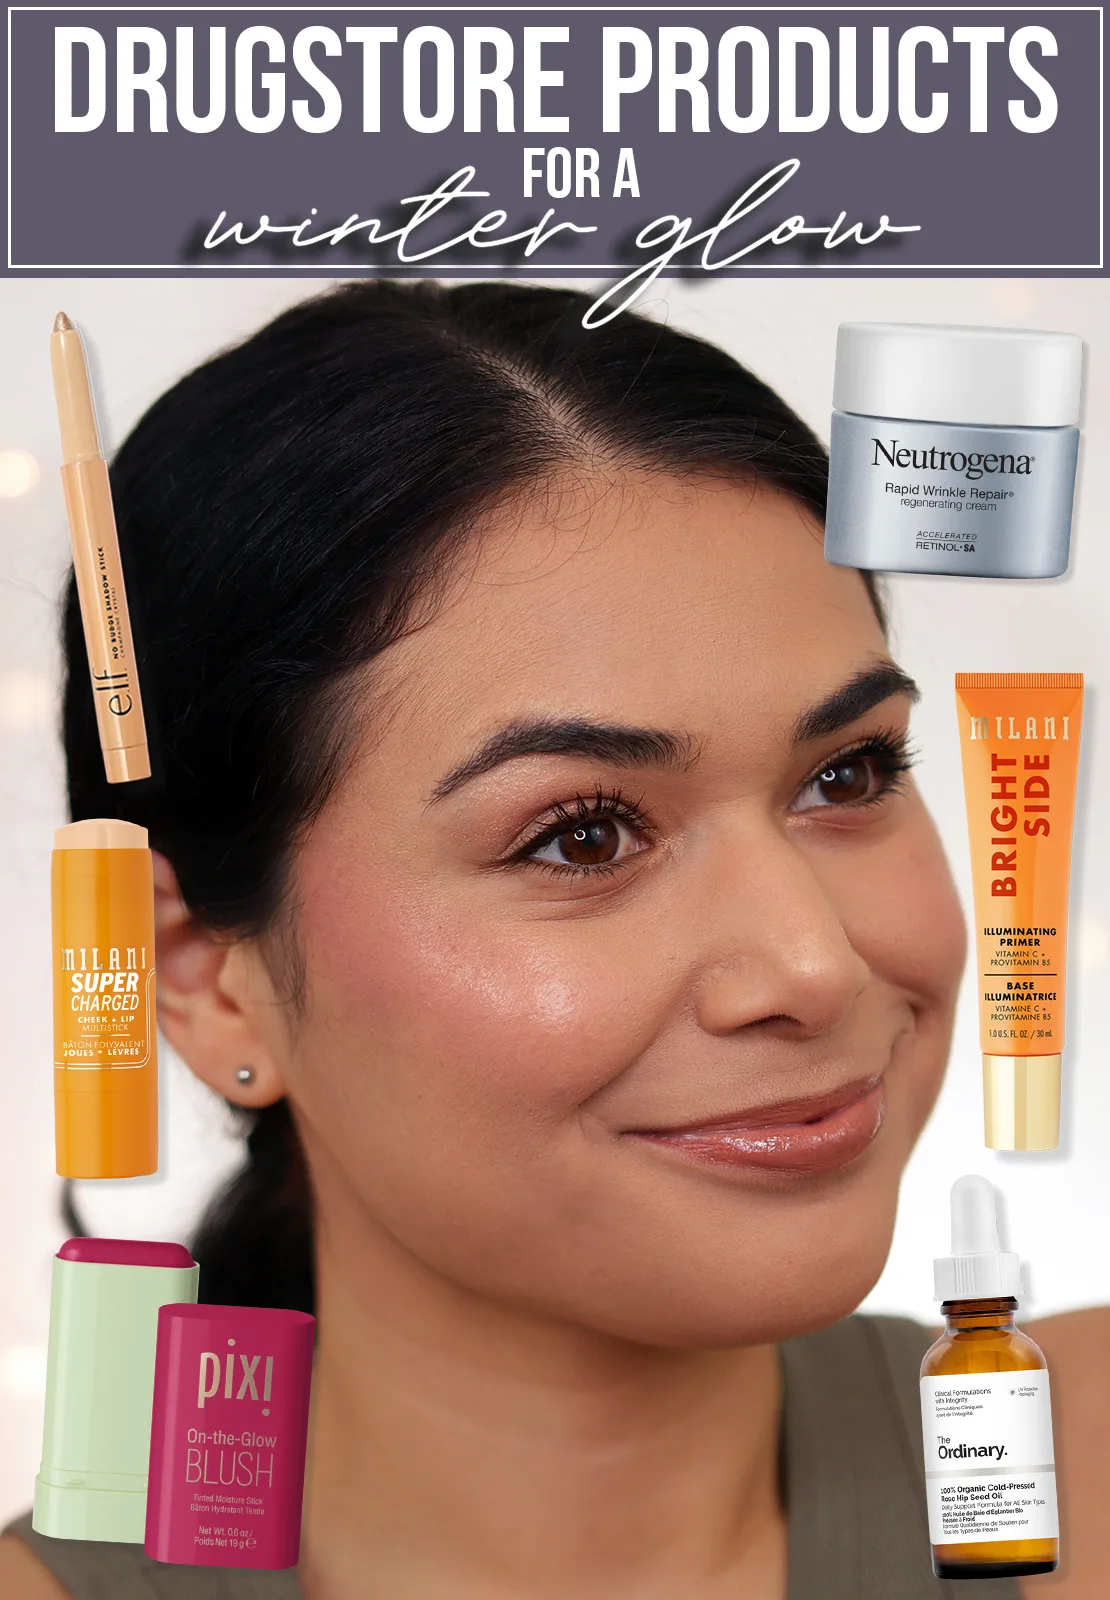 Miranda wearing a glowy makeup look with text: Drugstore Products for a Winter Glow | Slashed Beauty 